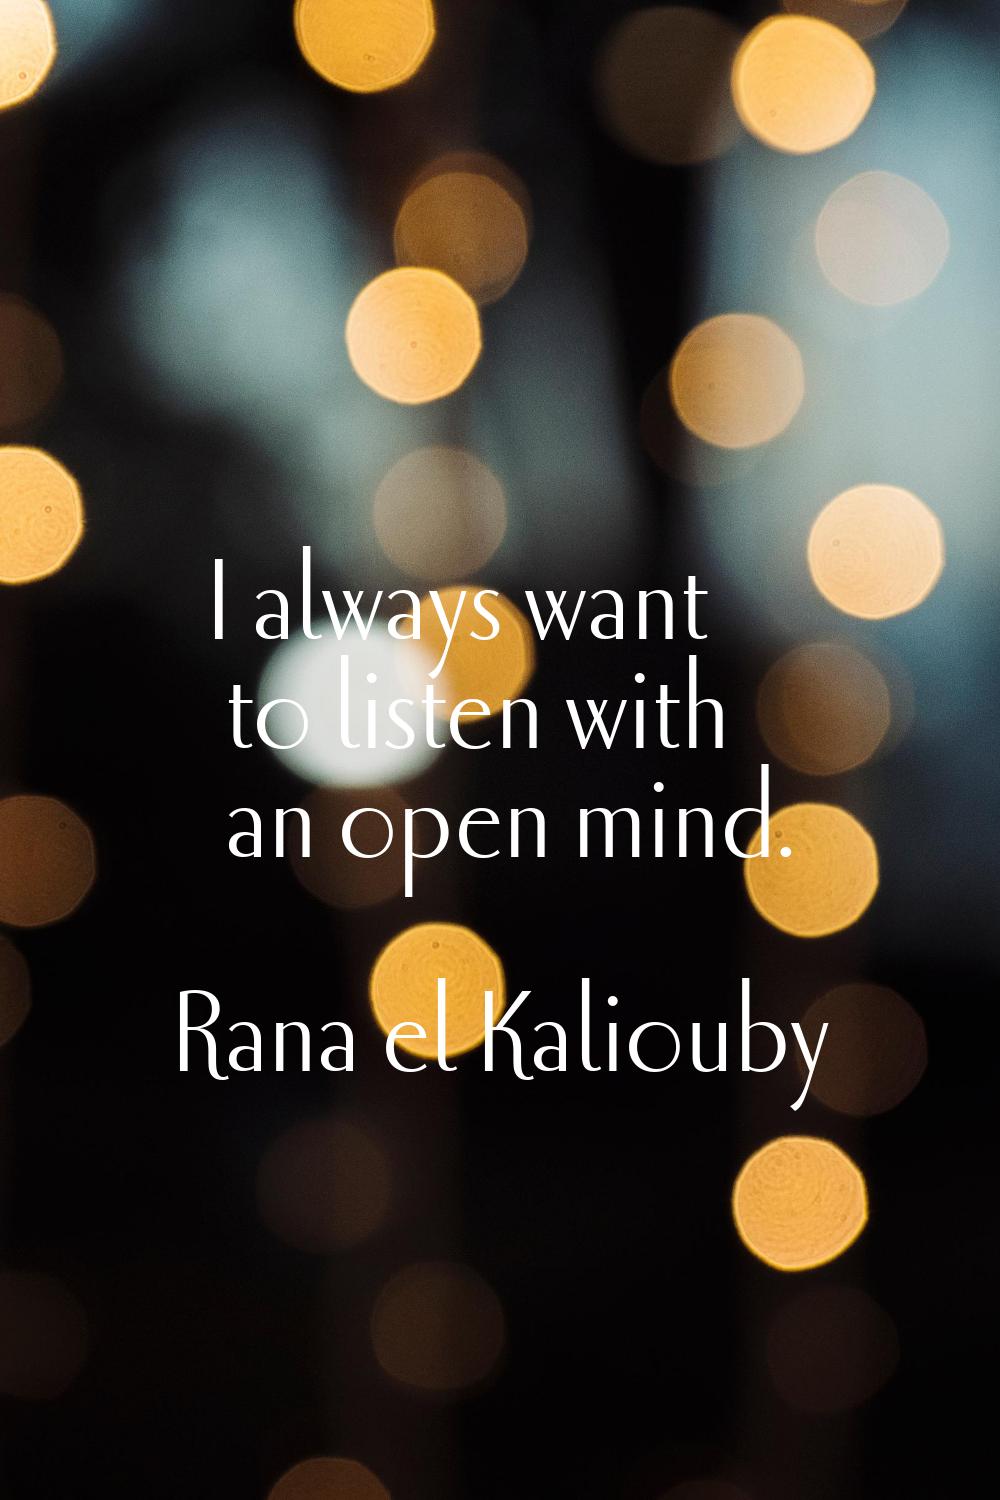 I always want to listen with an open mind.